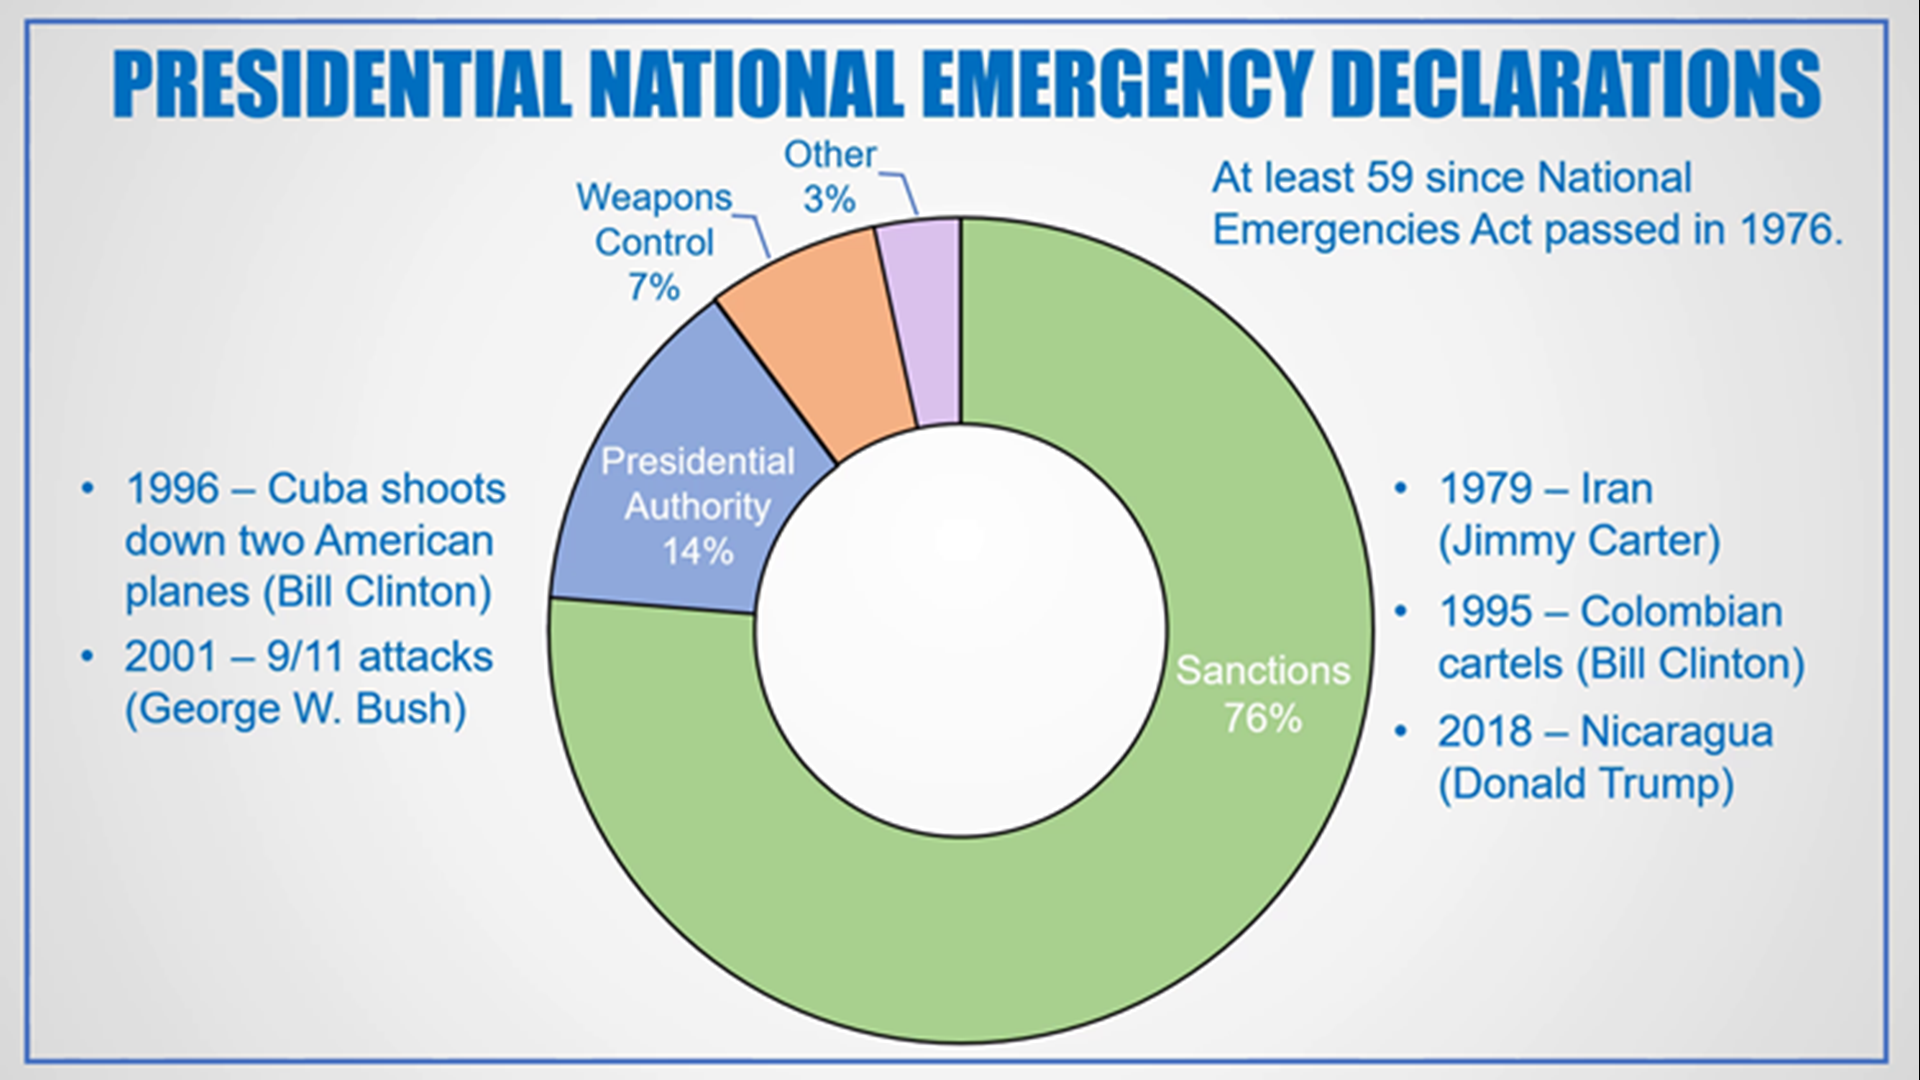 number of national emergency declared by past presidents